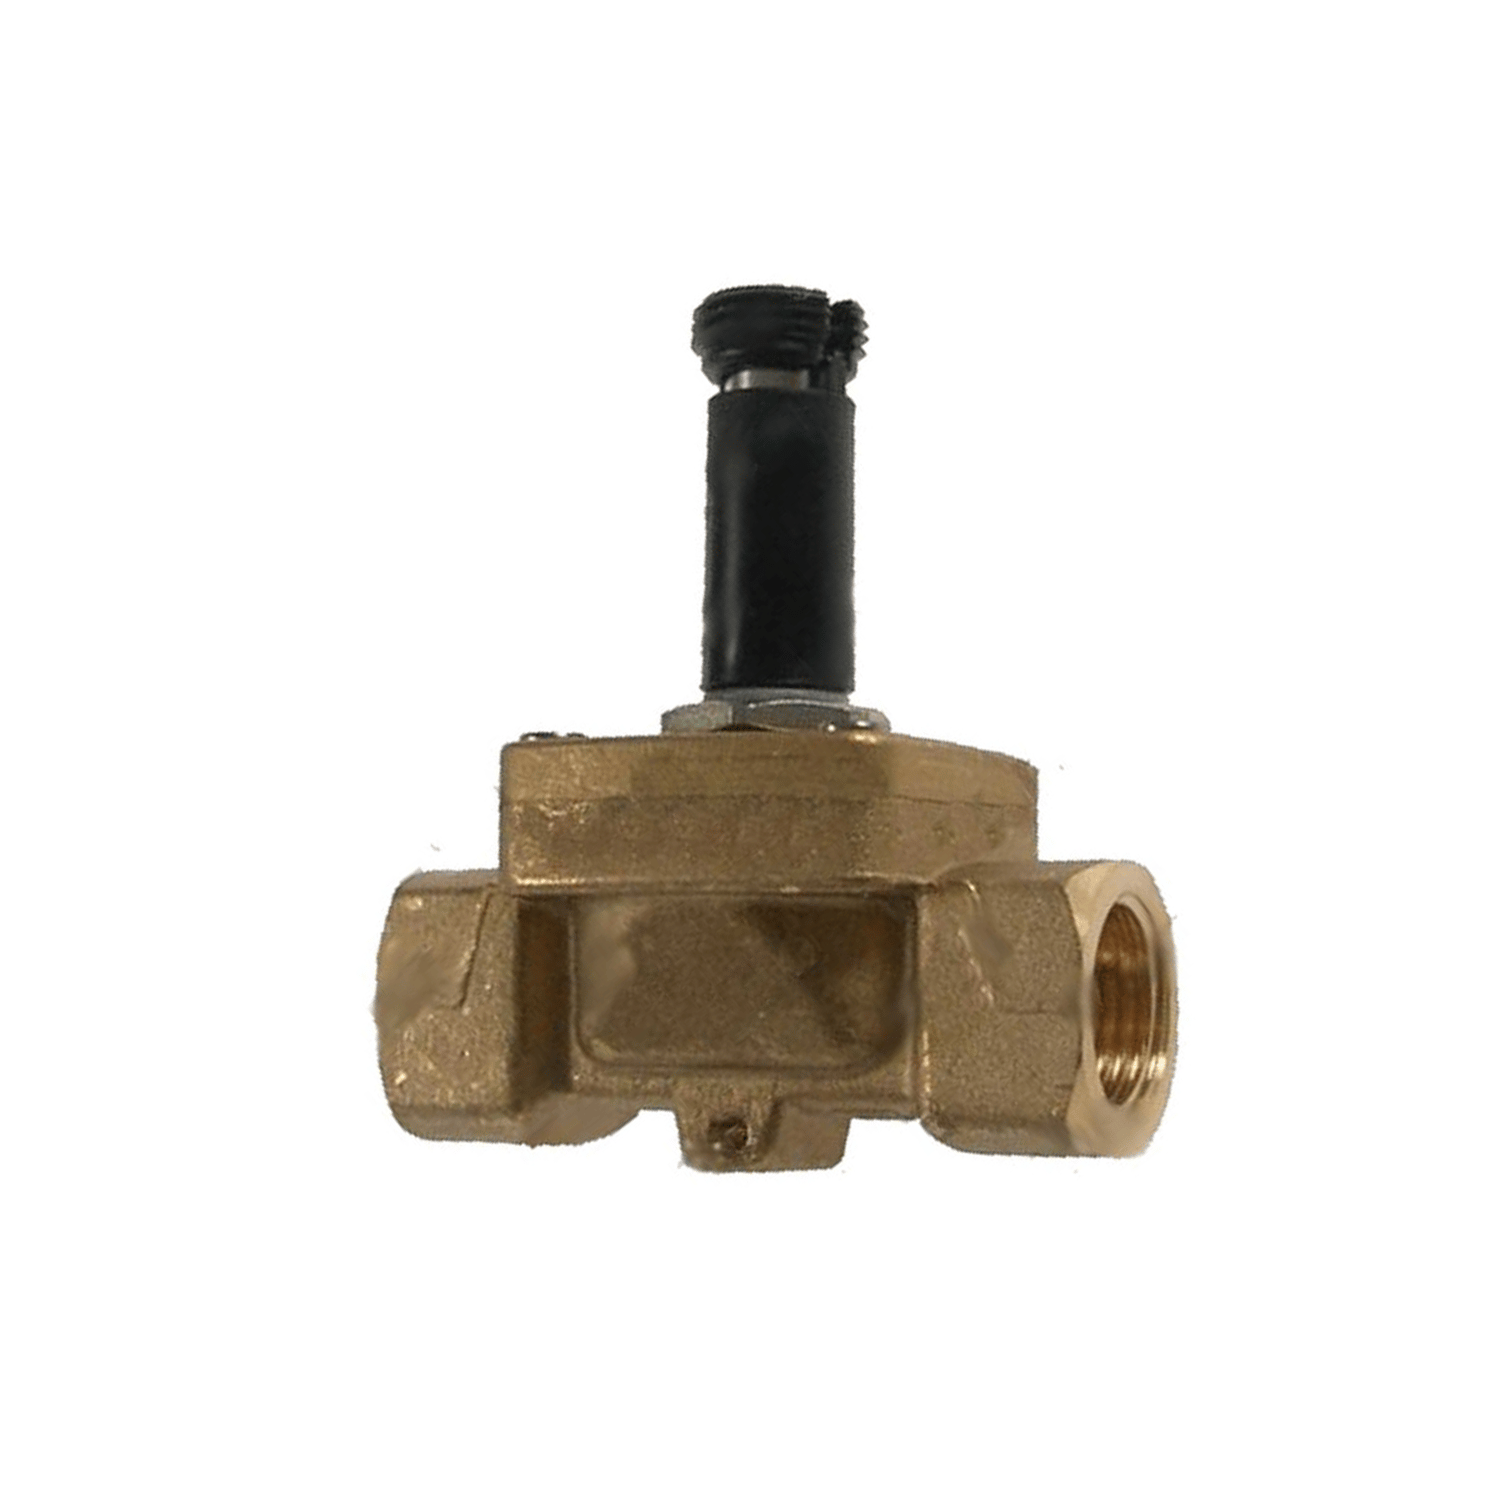 Solenoid valve Castel, NC, G 3/4 "flare connection, without coil 1132 / 06S